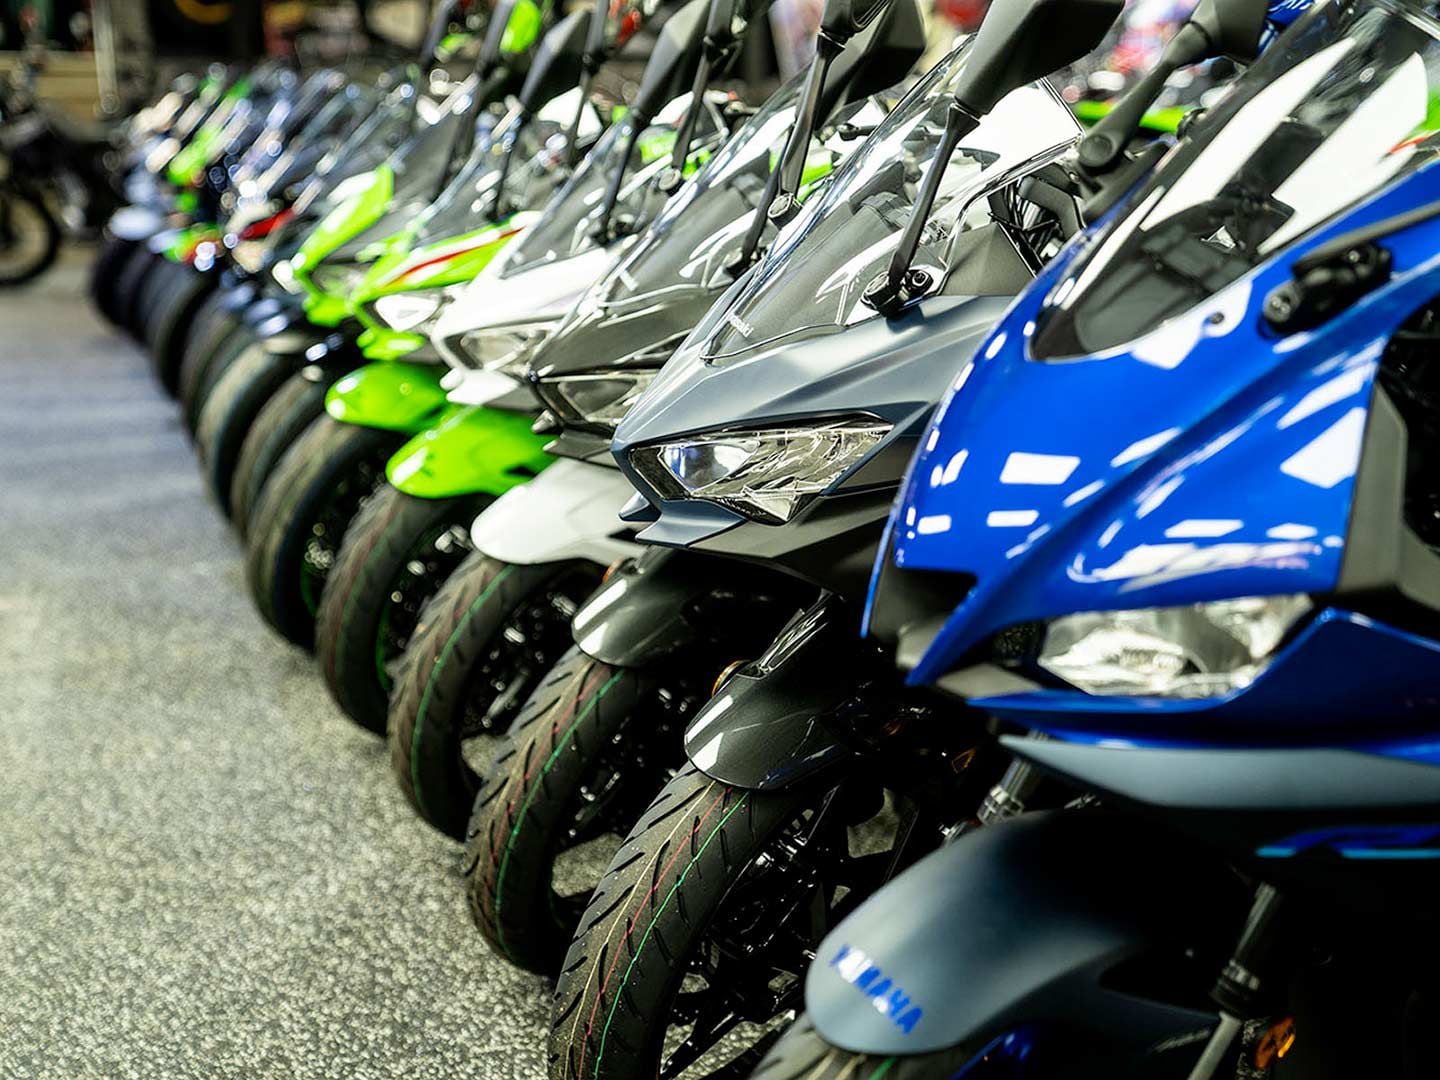 Crossroad Powersports in a multiline dealership carrying motorcycles, off-road vehicles, watercraft and more. The team emphasizes rider training and skill building that stems from the combined decades of racing experience by the Osner family, principals of the dealership.